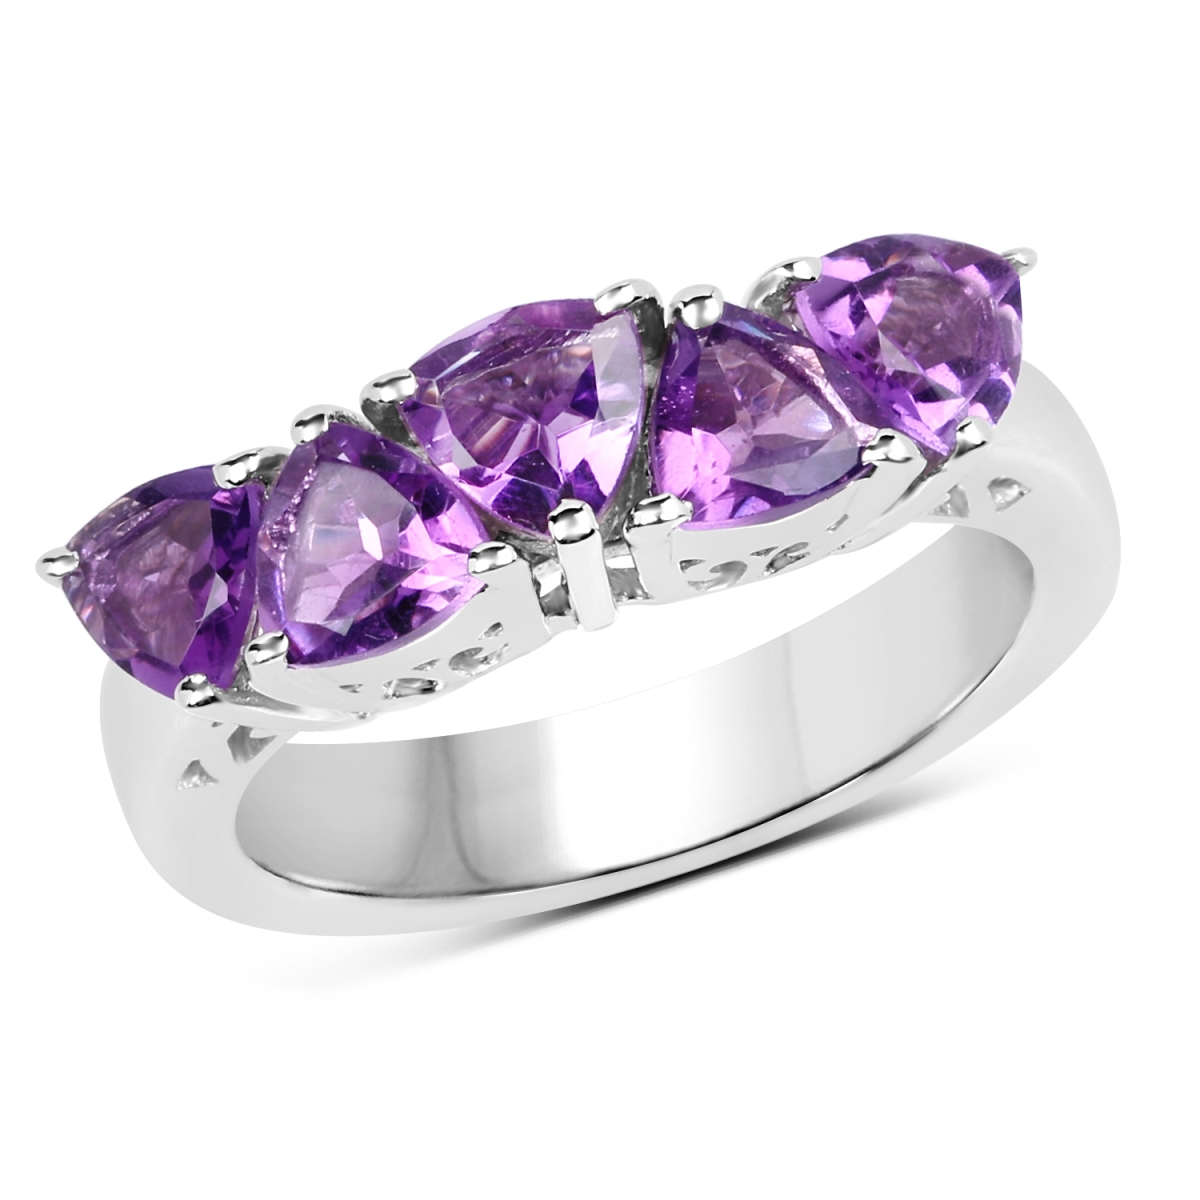 Picture of HauteFacets QR19058A-SSR-6 2.00 Carat Genuine Amethyst 925 Sterling Silver Ring  Purple - Size 6